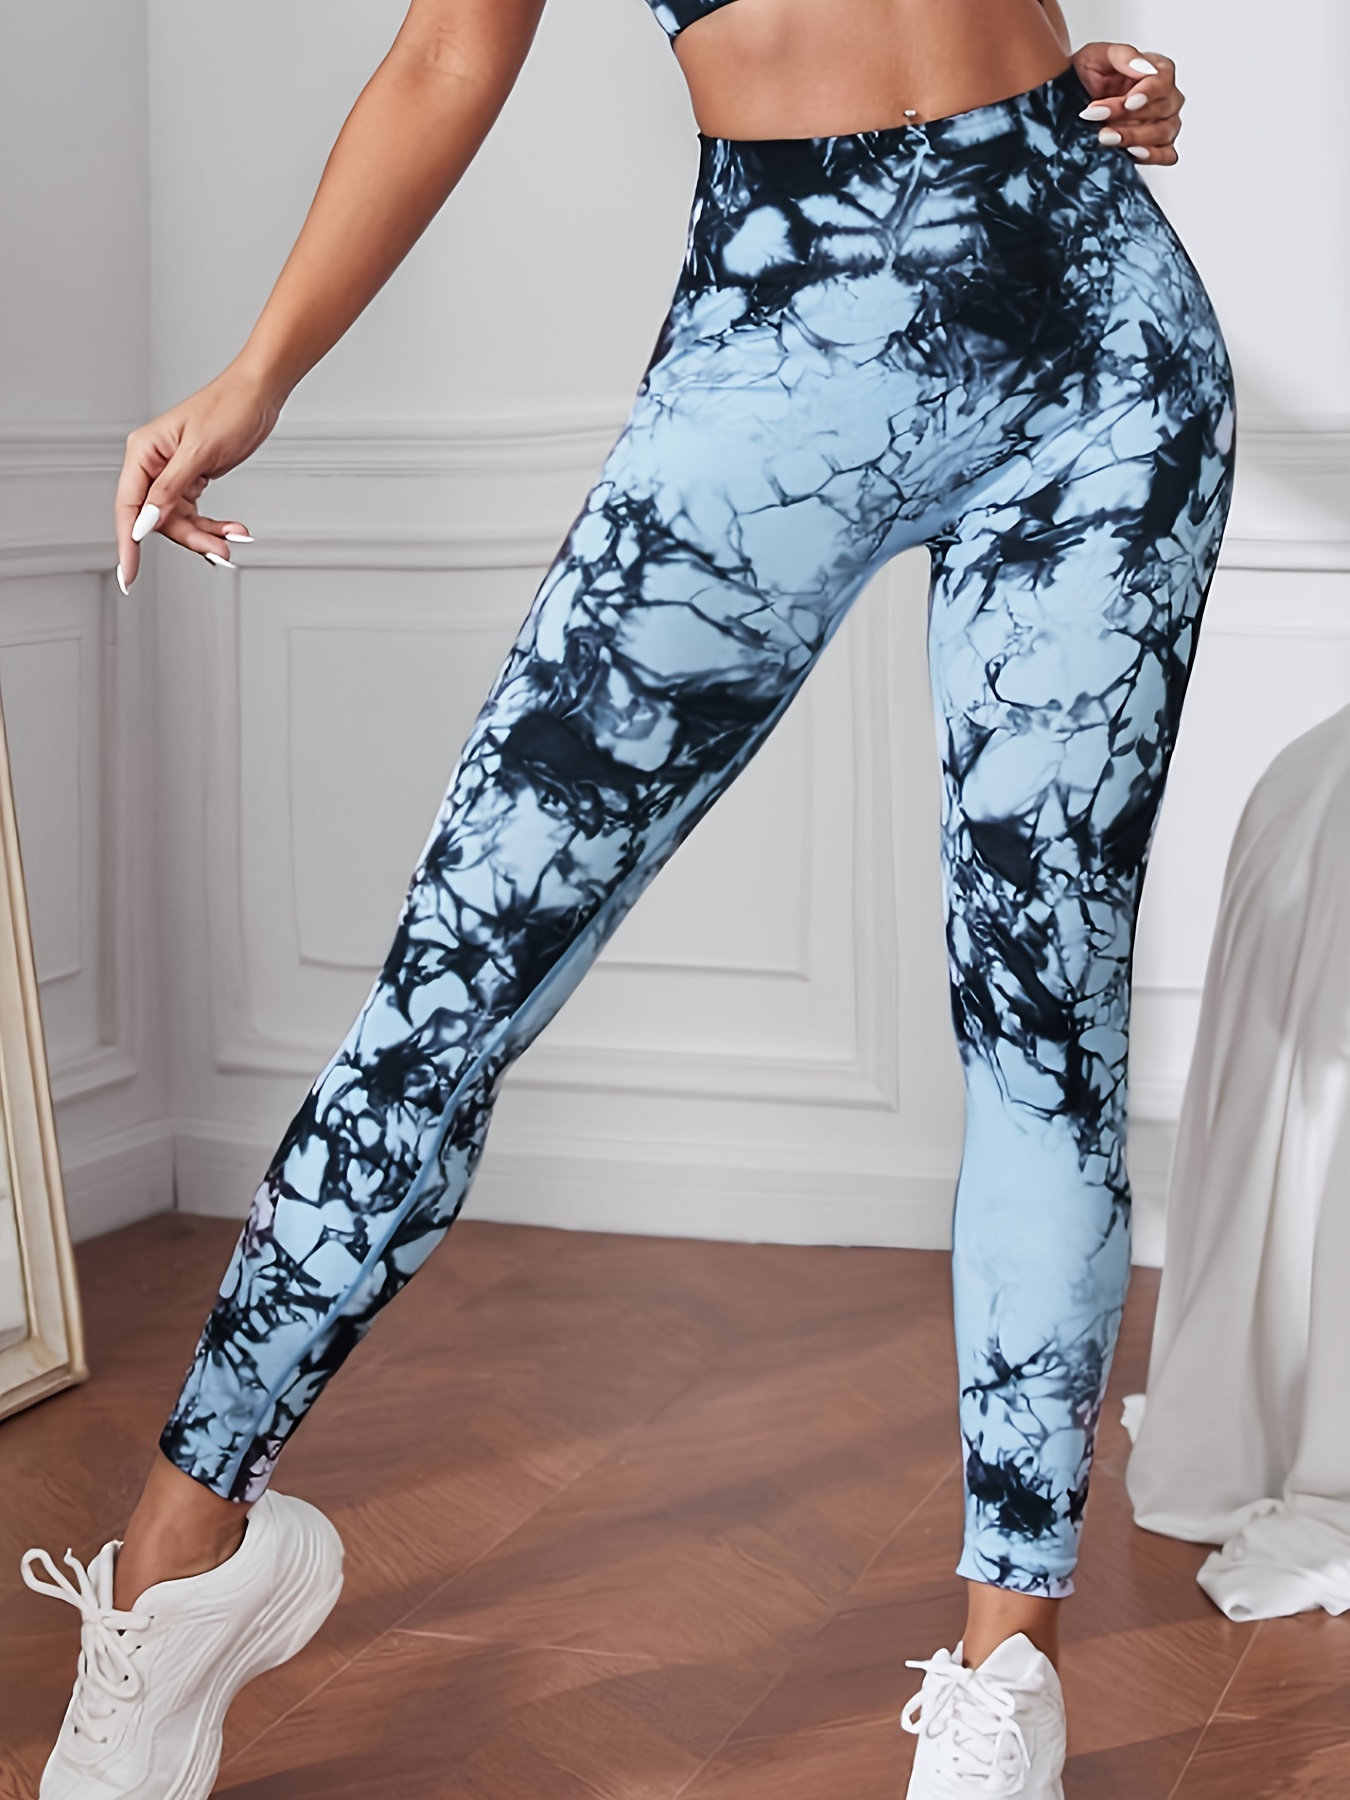 Senita Athletics - We've been getting some requests for tie dye sets the  Marine Marble Amp Leggings give us tie dye vibes, but who would like to see  some tie dye inspired